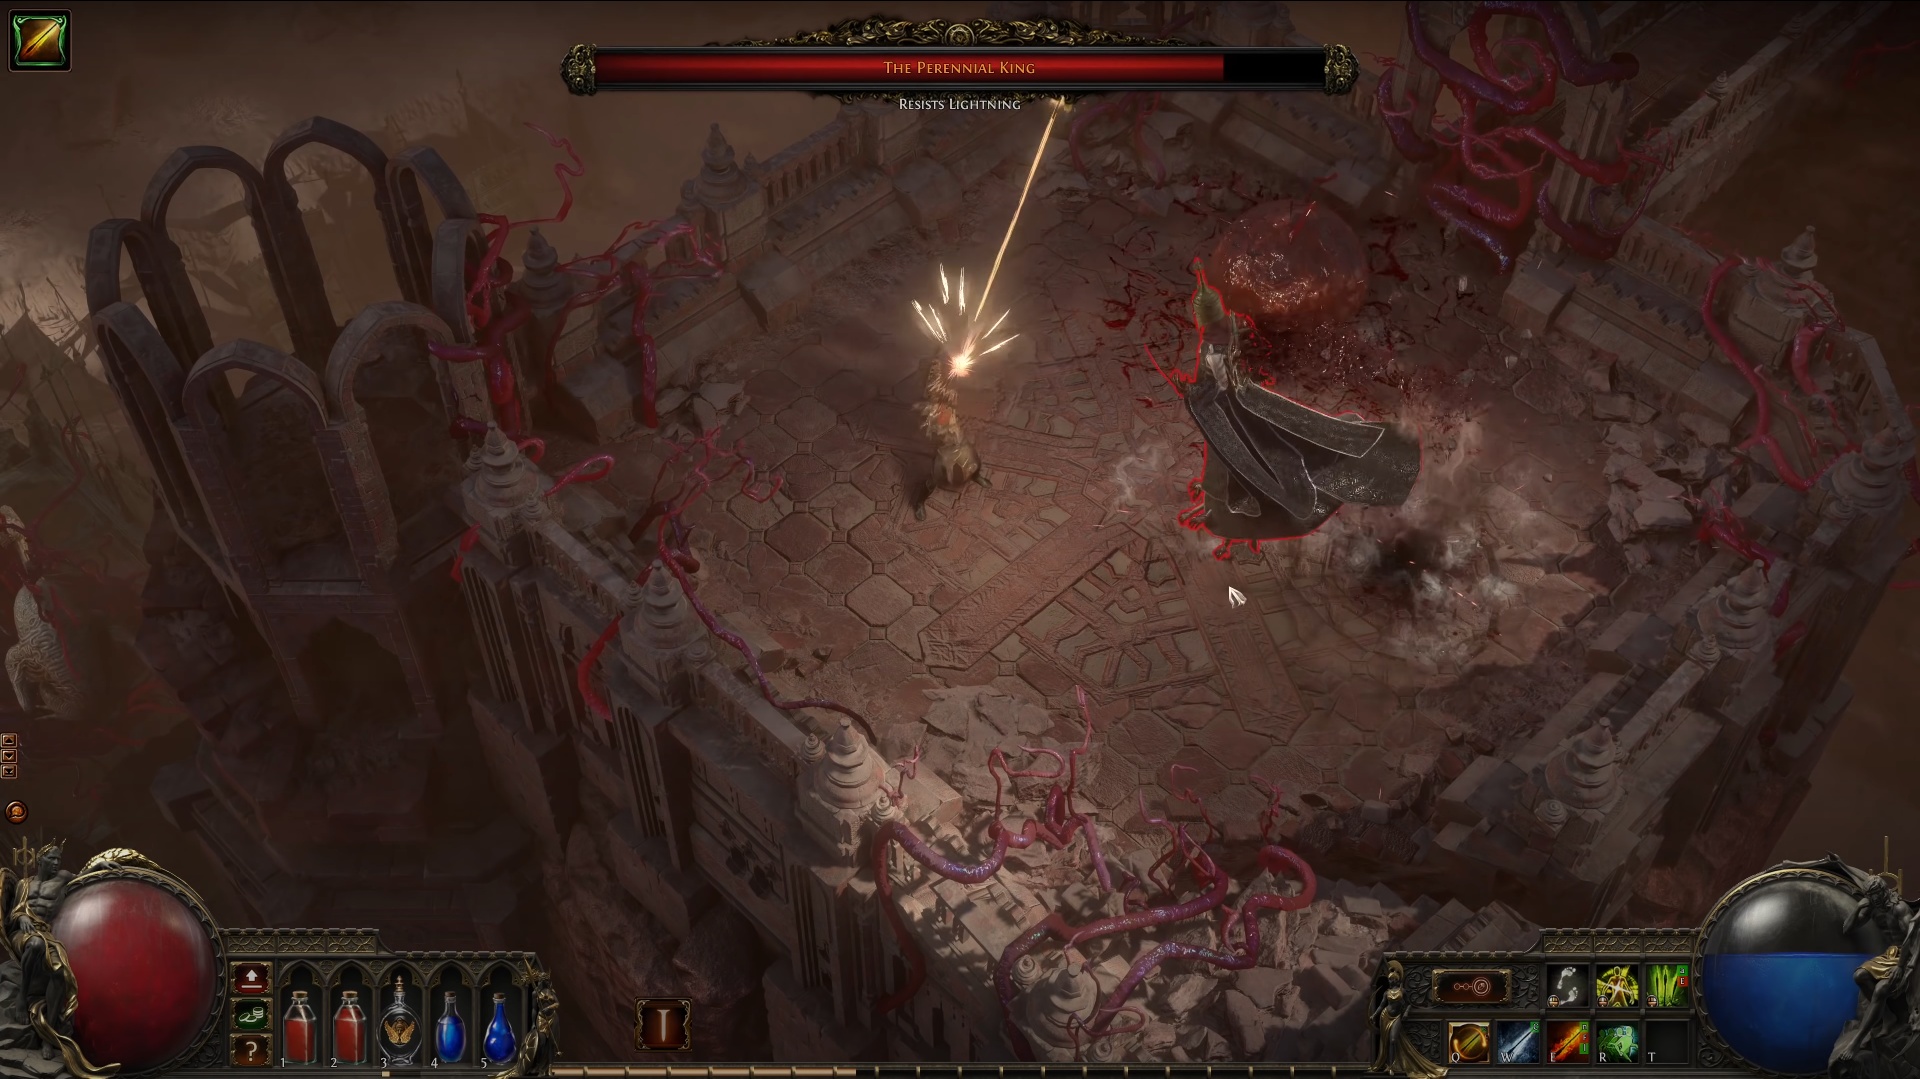 will path of exile 2 be free